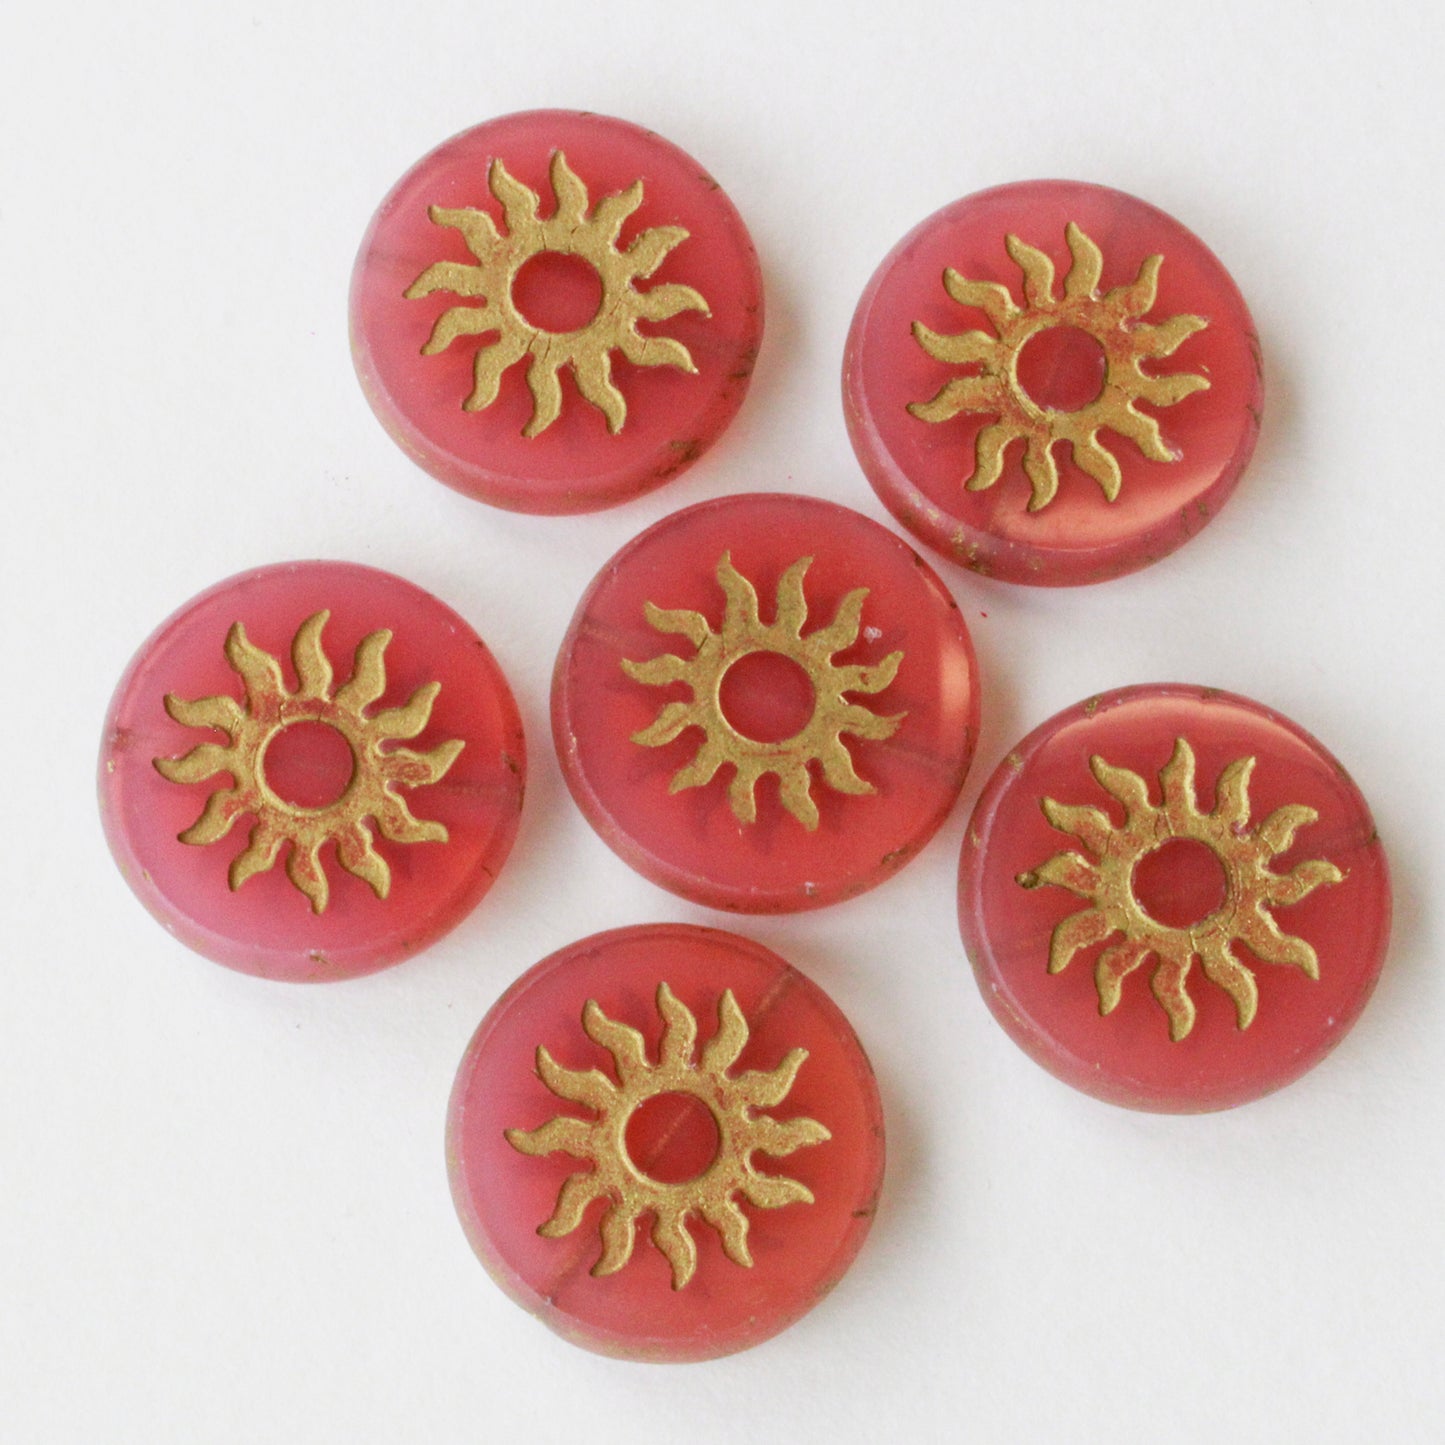 Load image into Gallery viewer, 22mm Sun Coin Beads - Opaline Pink Glass with Gold Wash - 1 Bead
